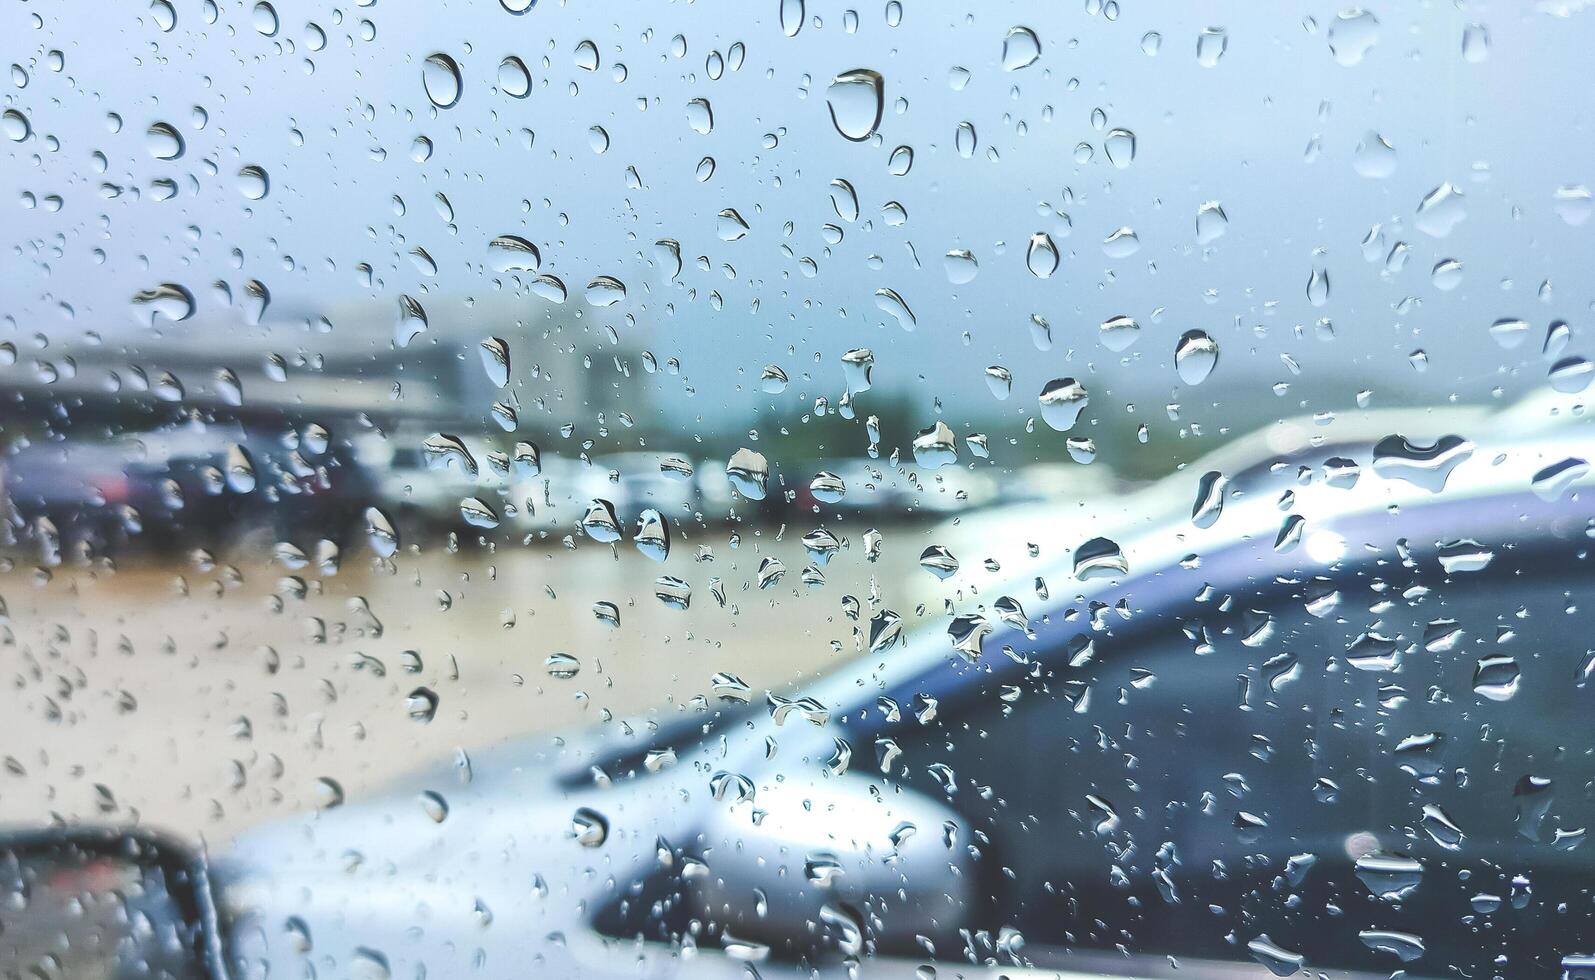 Rain drops on car glass window surface of driver's door while parked in outdoors parking lot during rainy weather photo